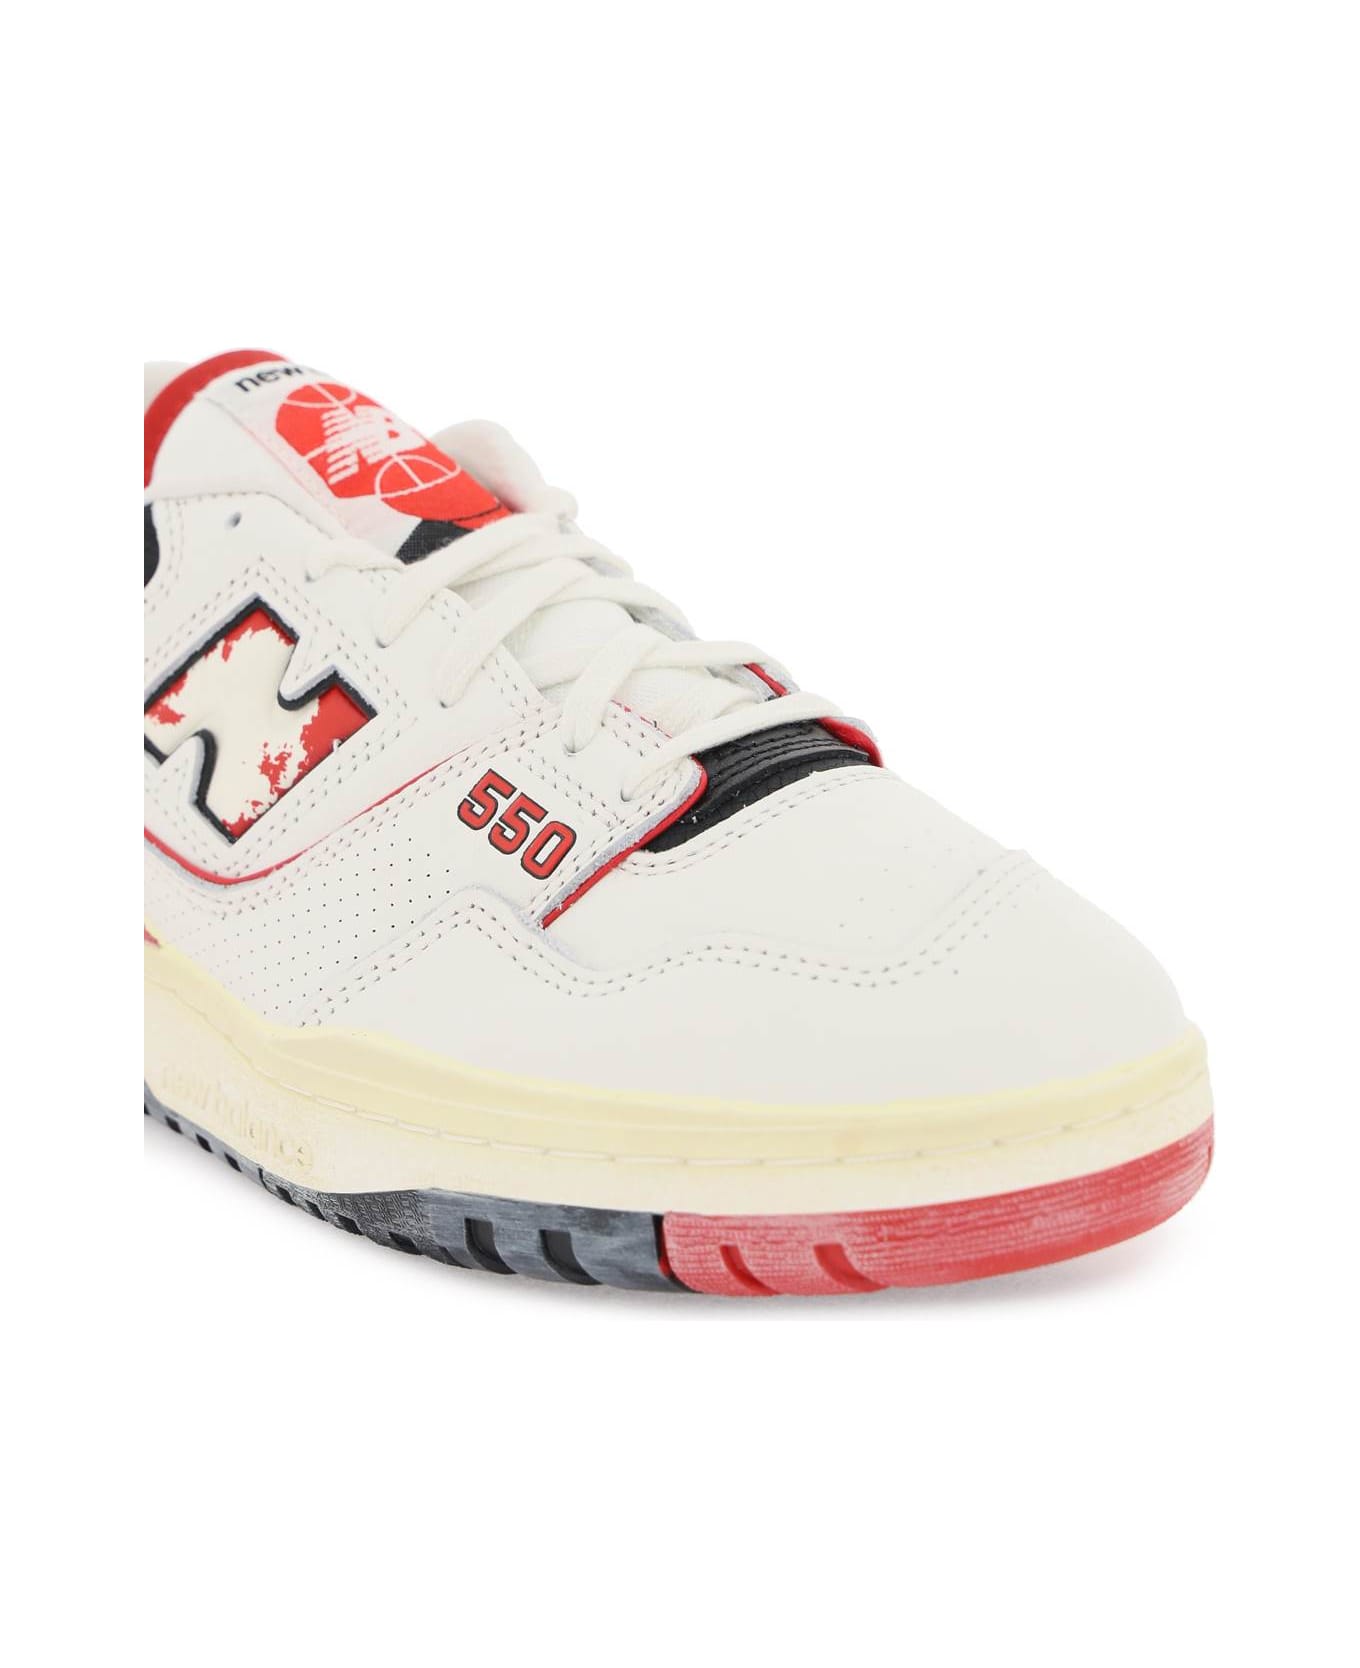 New Balance Vintage-effect 550 Sneakers - OFF WHITE RED (White) スニーカー